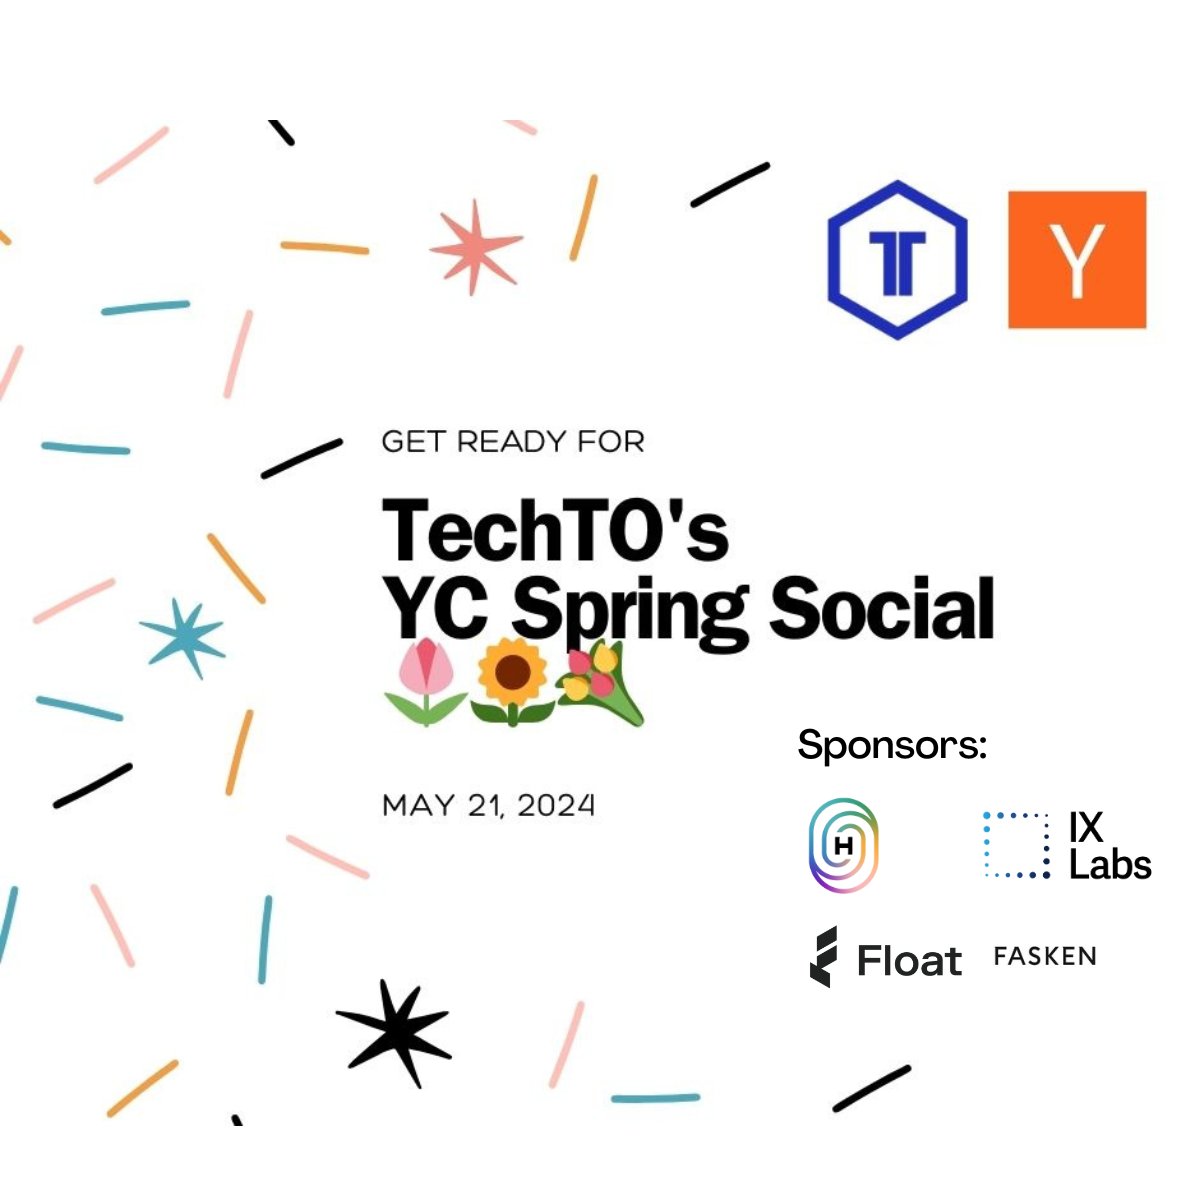 One week until the biggest YC event in Canadian history. Over 100 YC founders taking over a Toronto restaurant. Only open to founders with a Bookface profile. I've invited Toronto-area founders (check your email) but if you are an out of town founder and want to join DM me